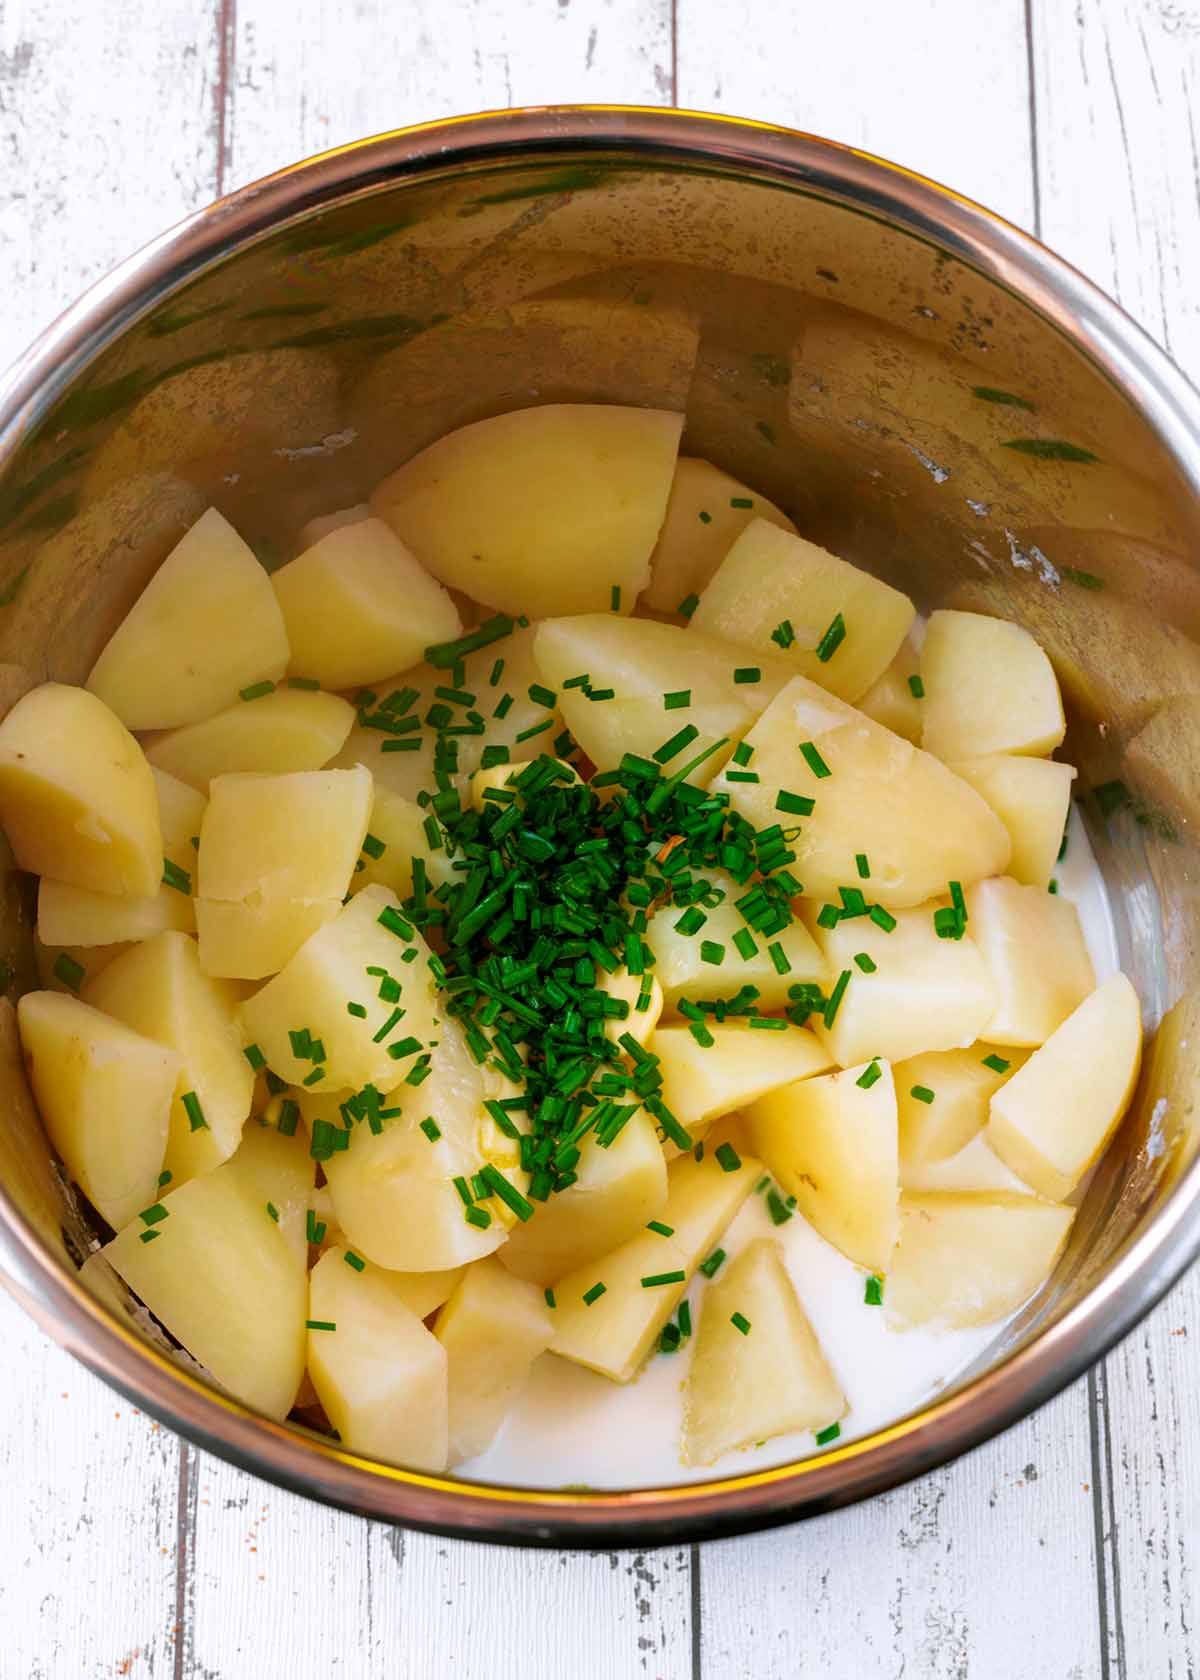 An instant pot containing cooked shopped potatoes, milk, butter and chopped chives.